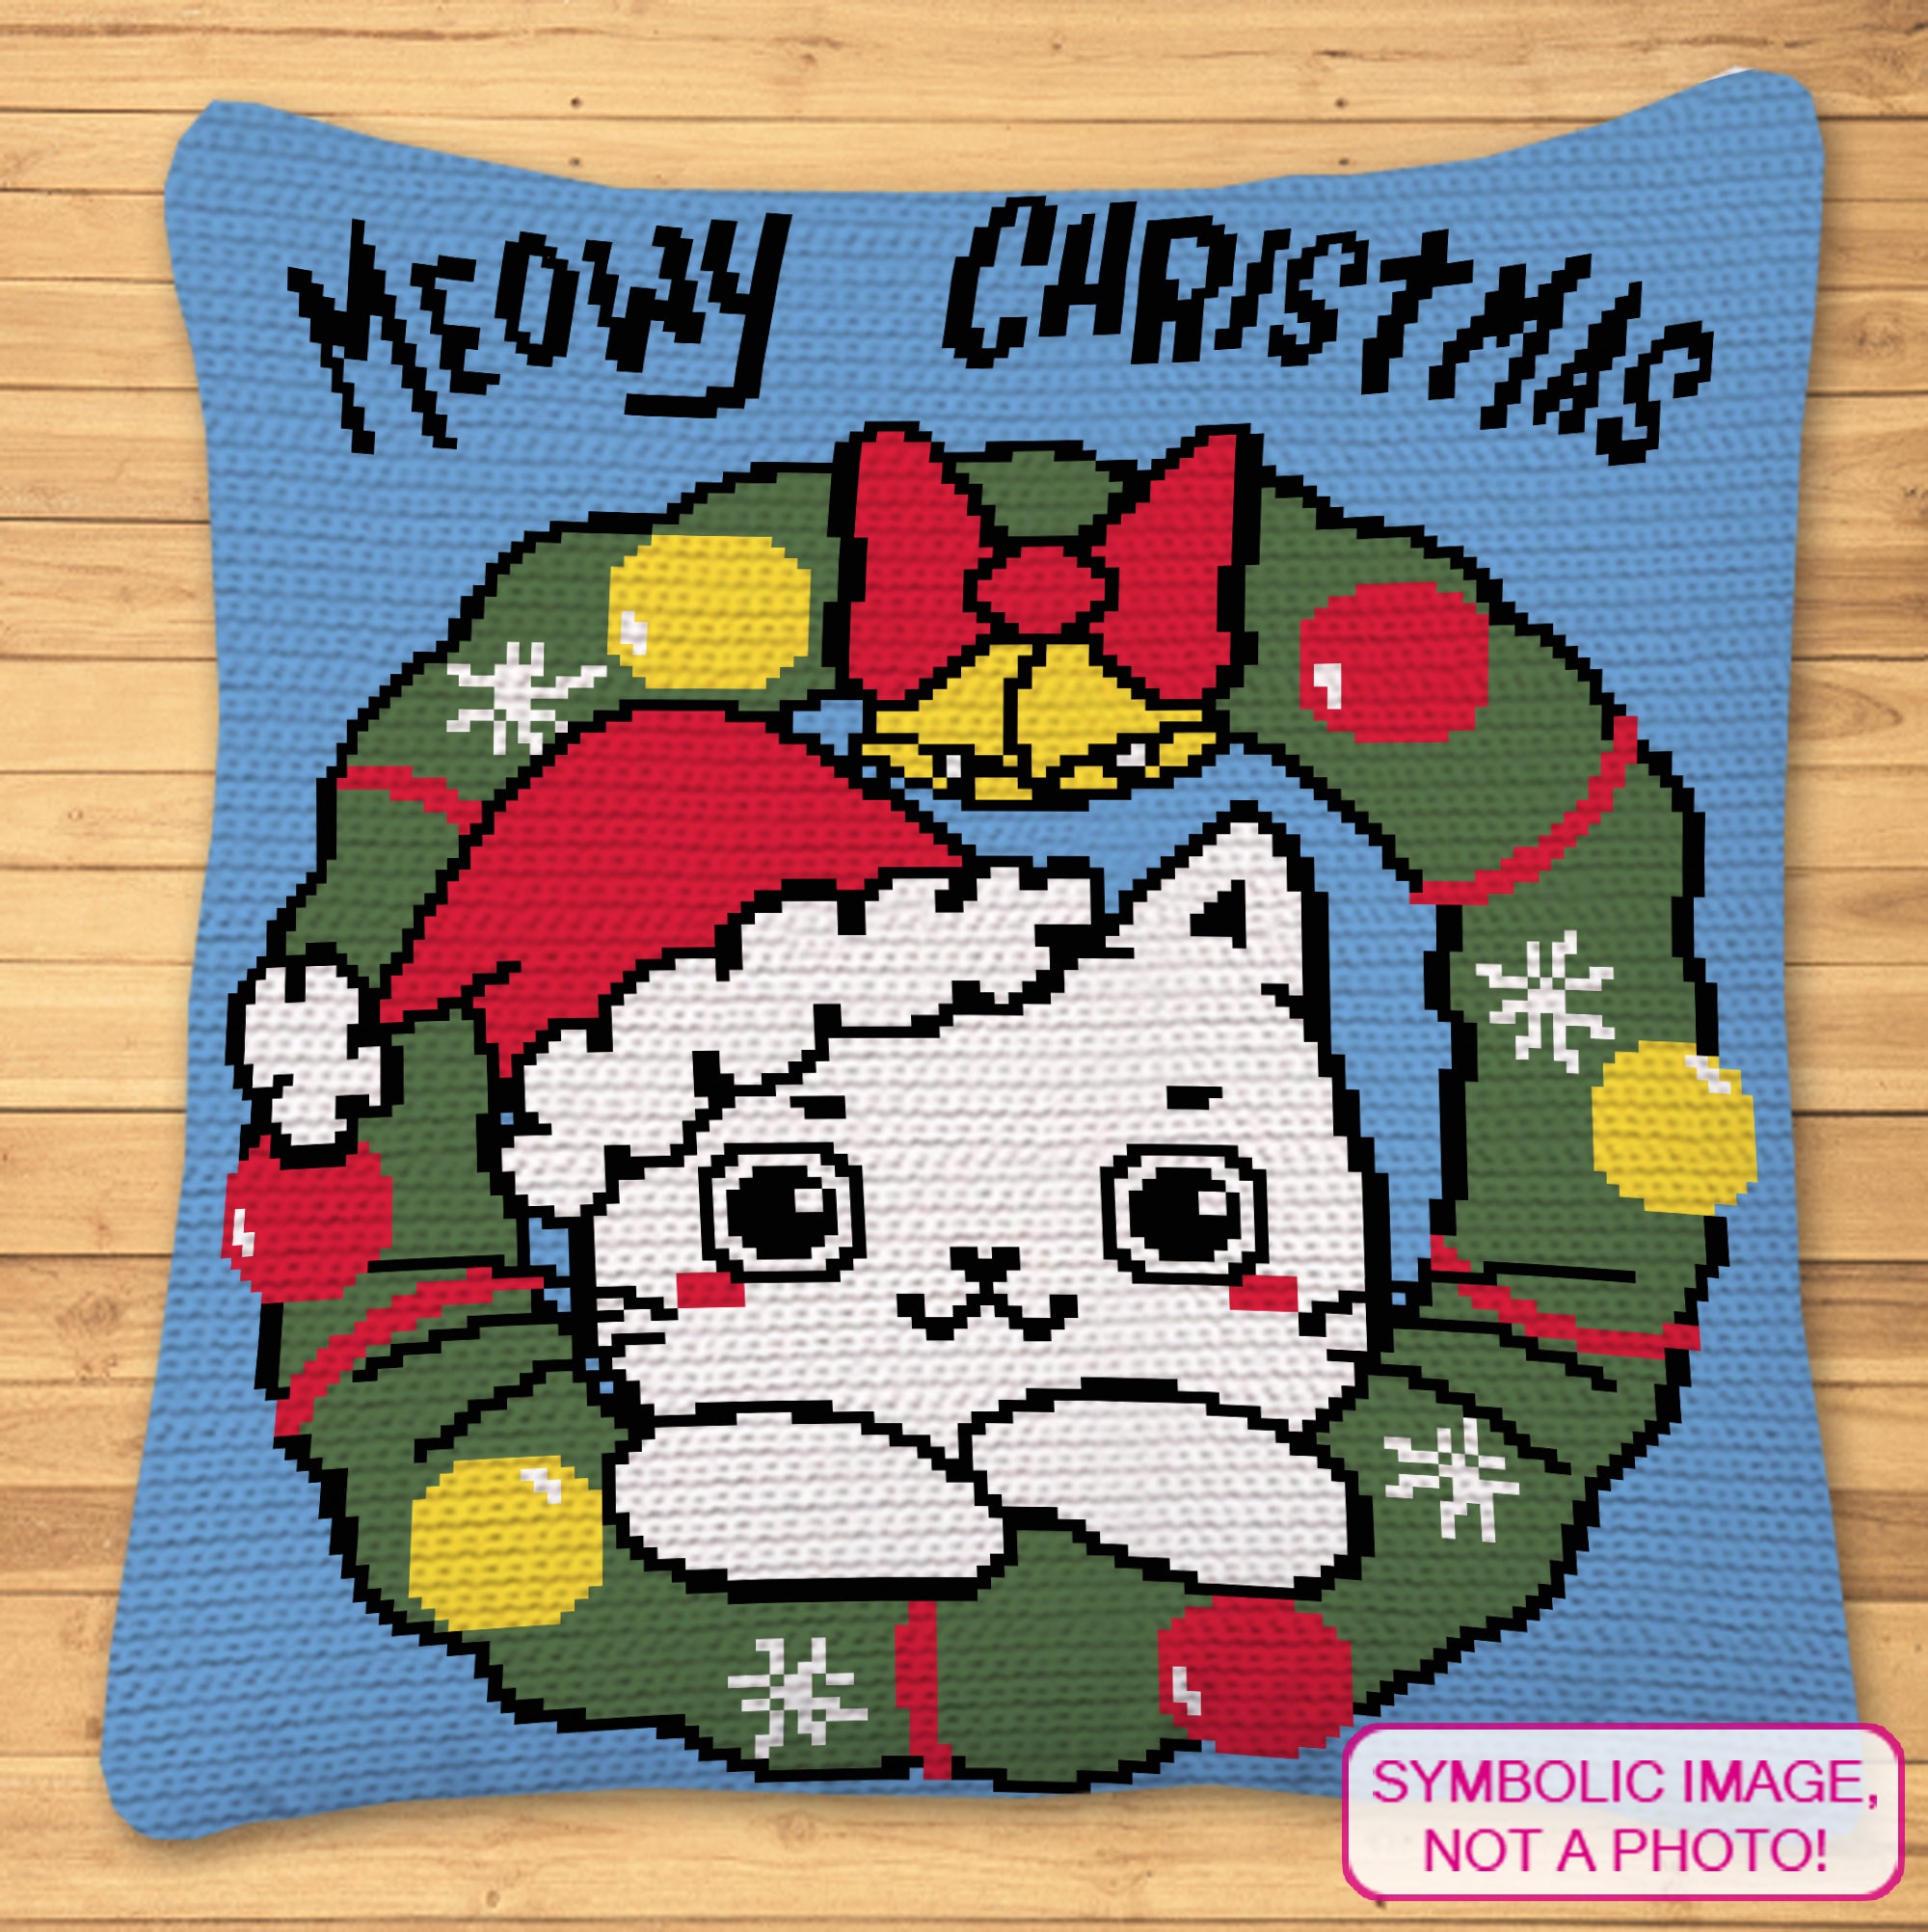 Meowy Christmas - Tapestry Crochet Blanket and Pillow Pattern